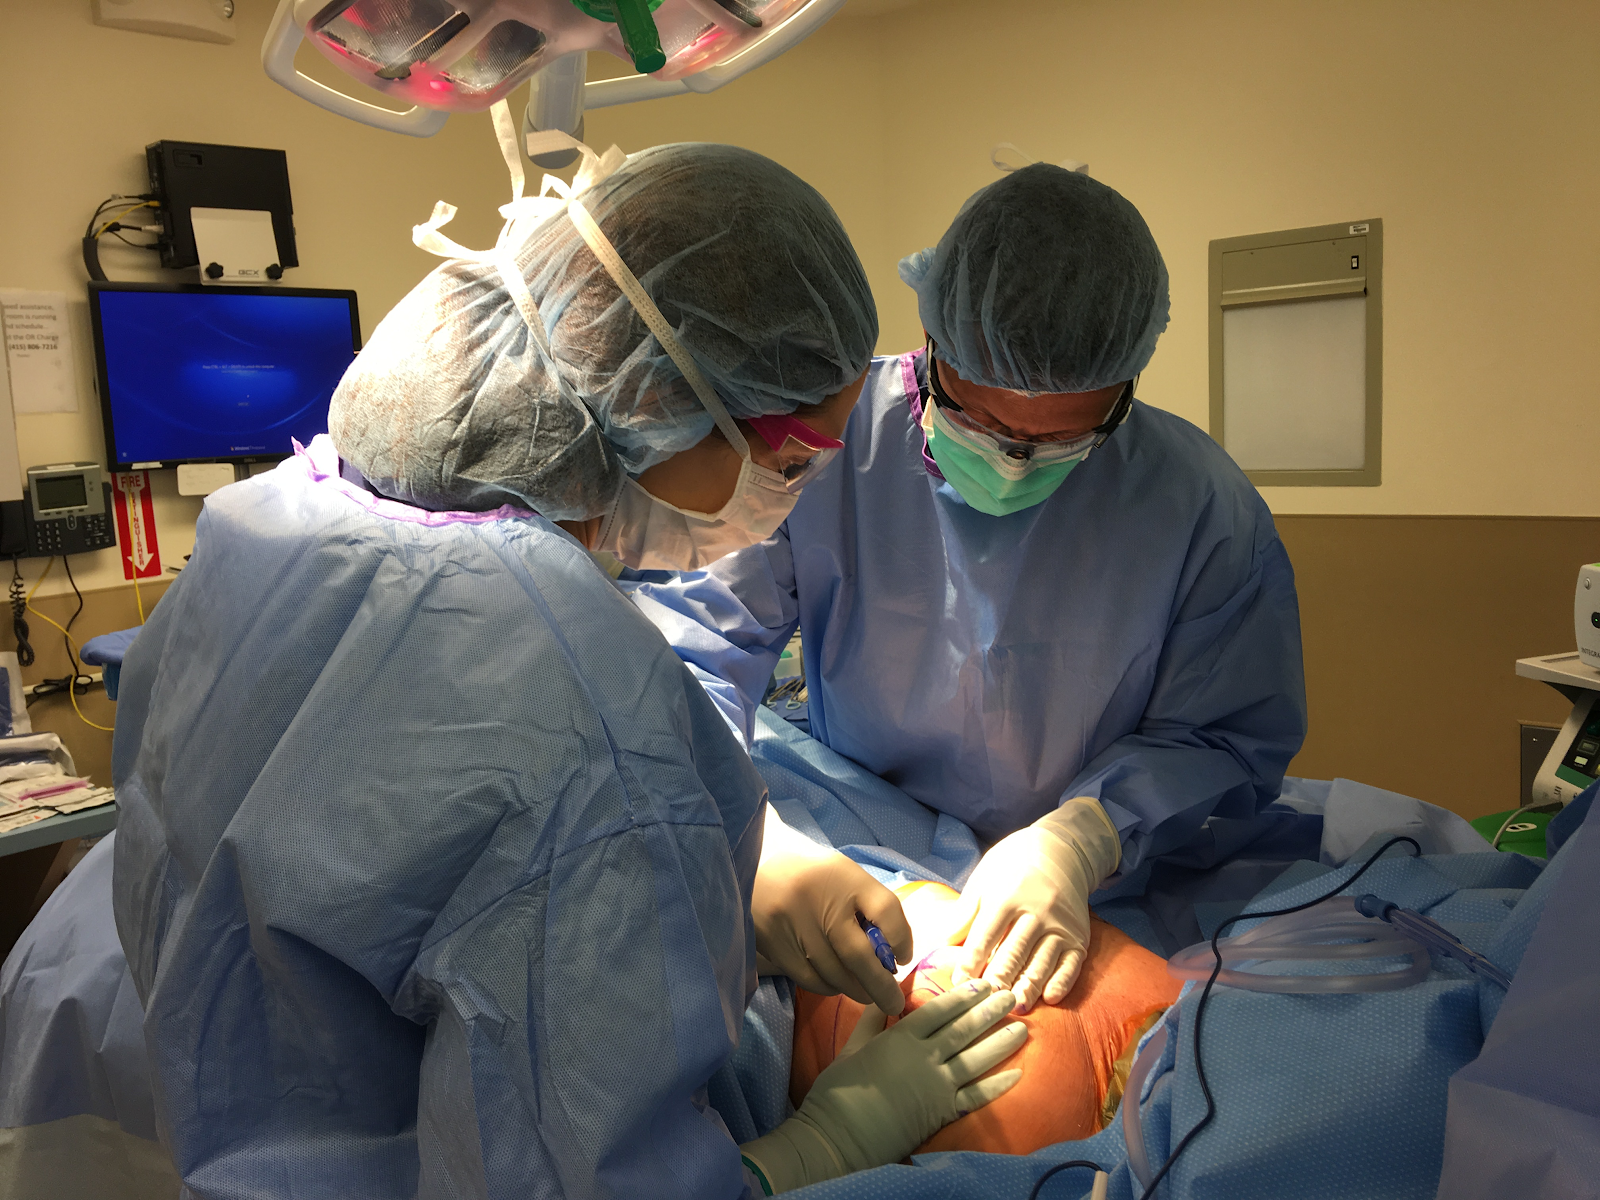 Anne Interviewed and Highlighted in the California Society of Plastic Surgeons - In this photo she is performing a surgery